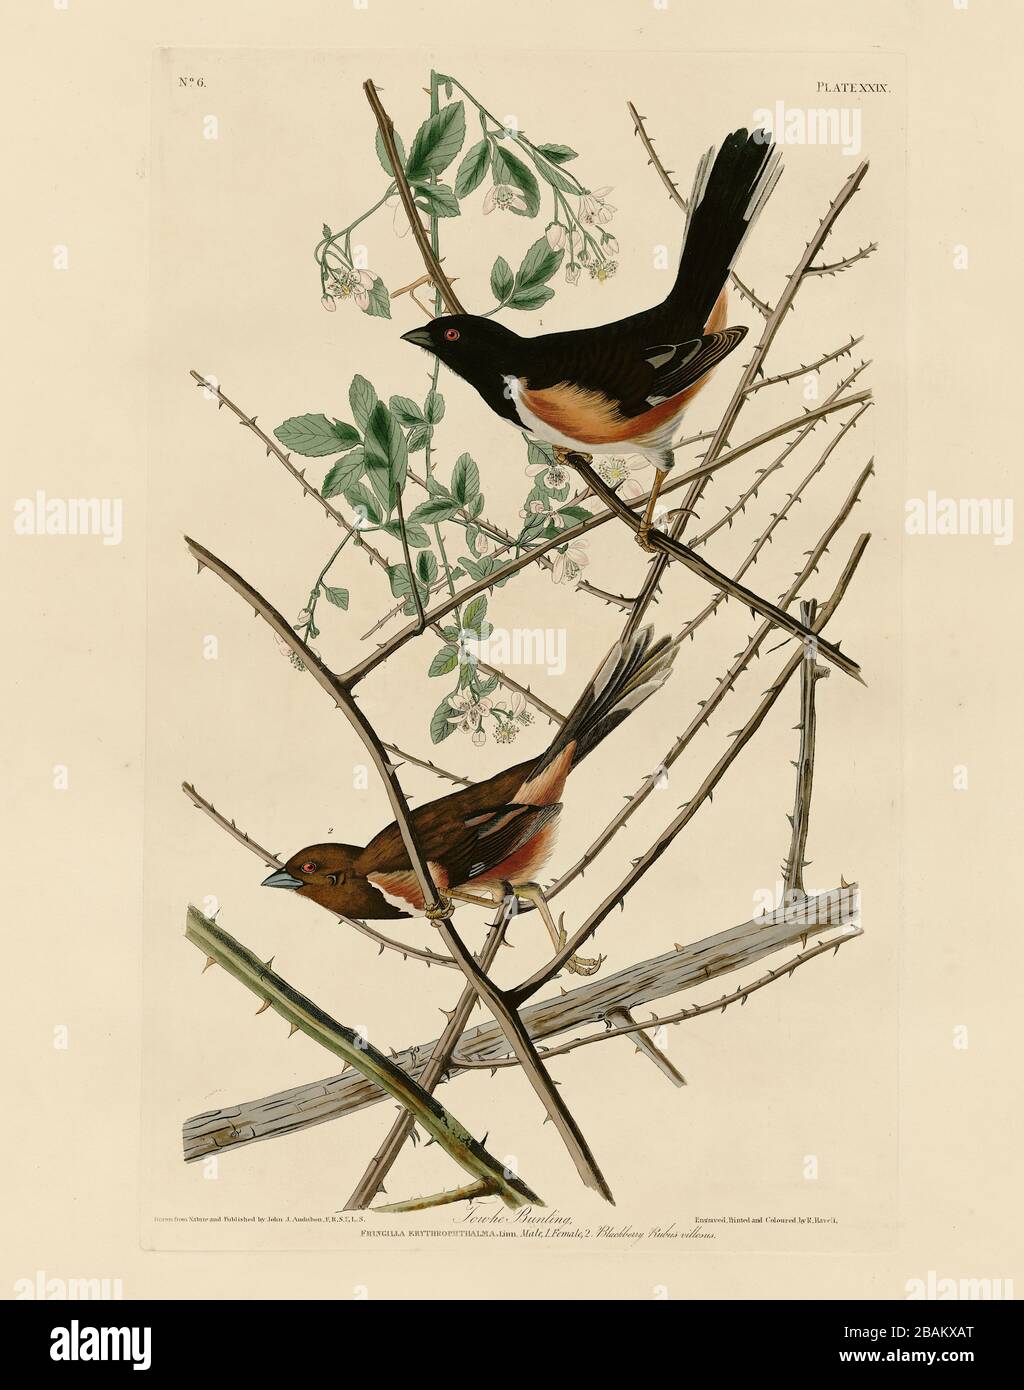 Plate 29 Towhe Bunting (Eastern Towee) from The Birds of America folio (1827–1839) - John James Audubon, Very high resolution and quality edited image Stock Photo